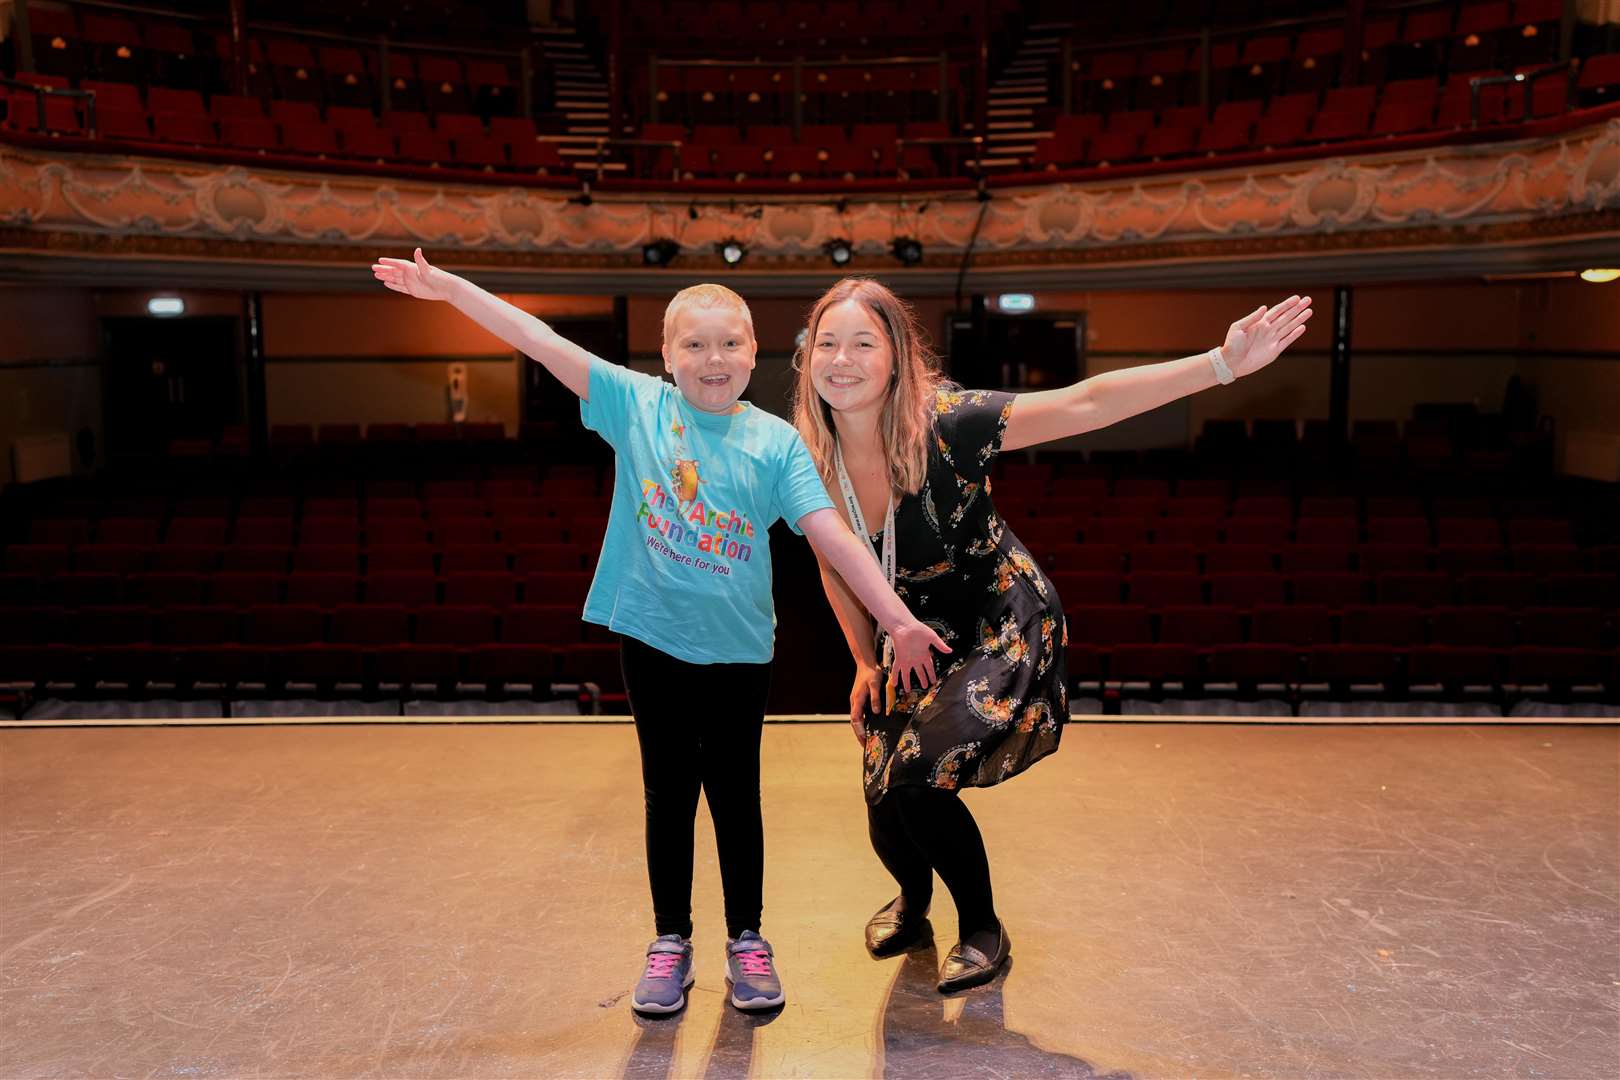 Show ambassador Izzy, who has been receiving cancer treatment at the Royal Aberdeen Children's Hospital, and fundraising manager at The Archie Foundation, Cassie McGunnigle, on stage at The Tivoli Theatre.